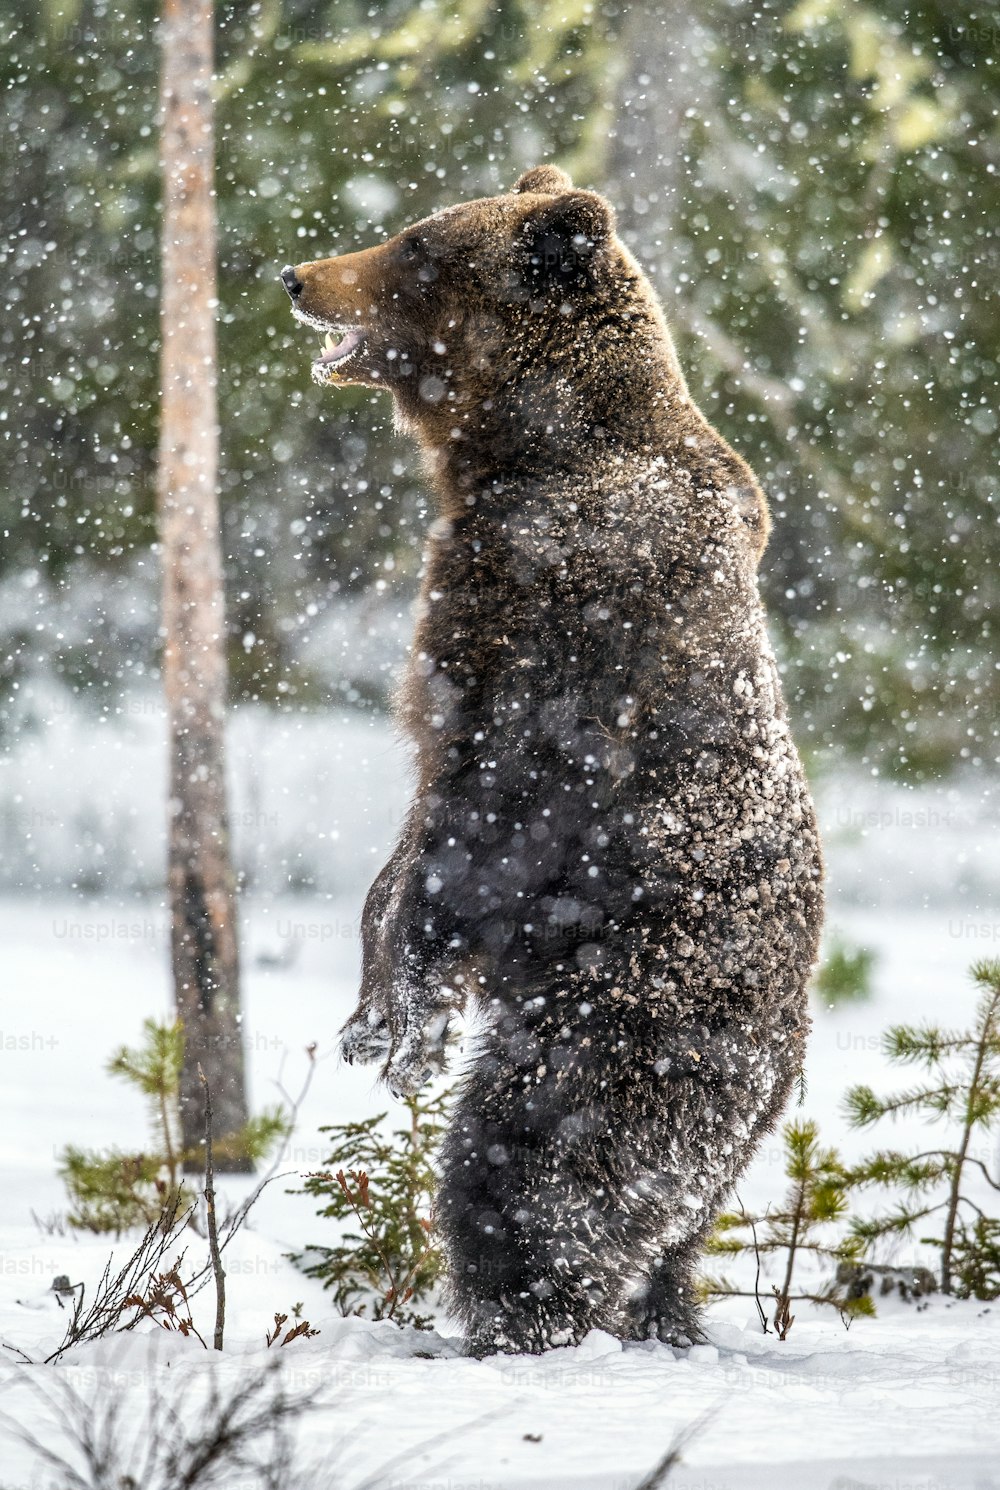 Brown bear standing on his hind legs on the snow in the winter forest. Snowfall. Scientific name:  Ursus arctos. Natural habitat. Winter season.